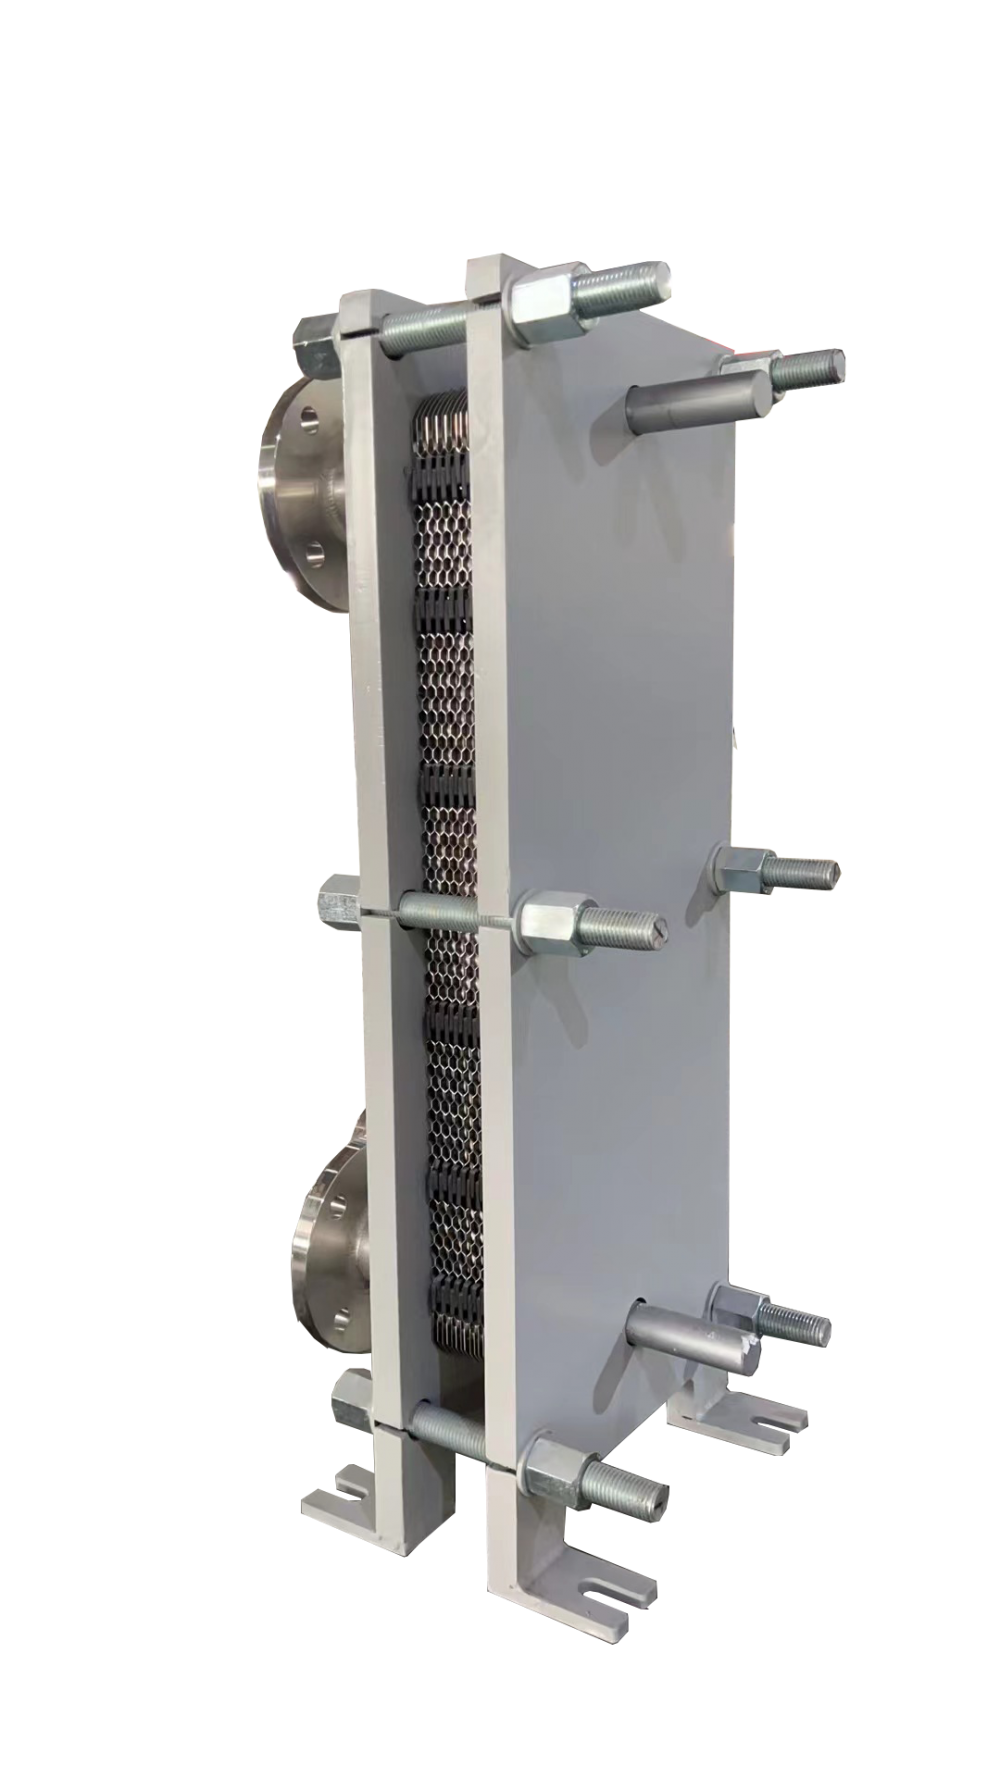 Flat Plate Heat Exchanger for Domestic Hot Water